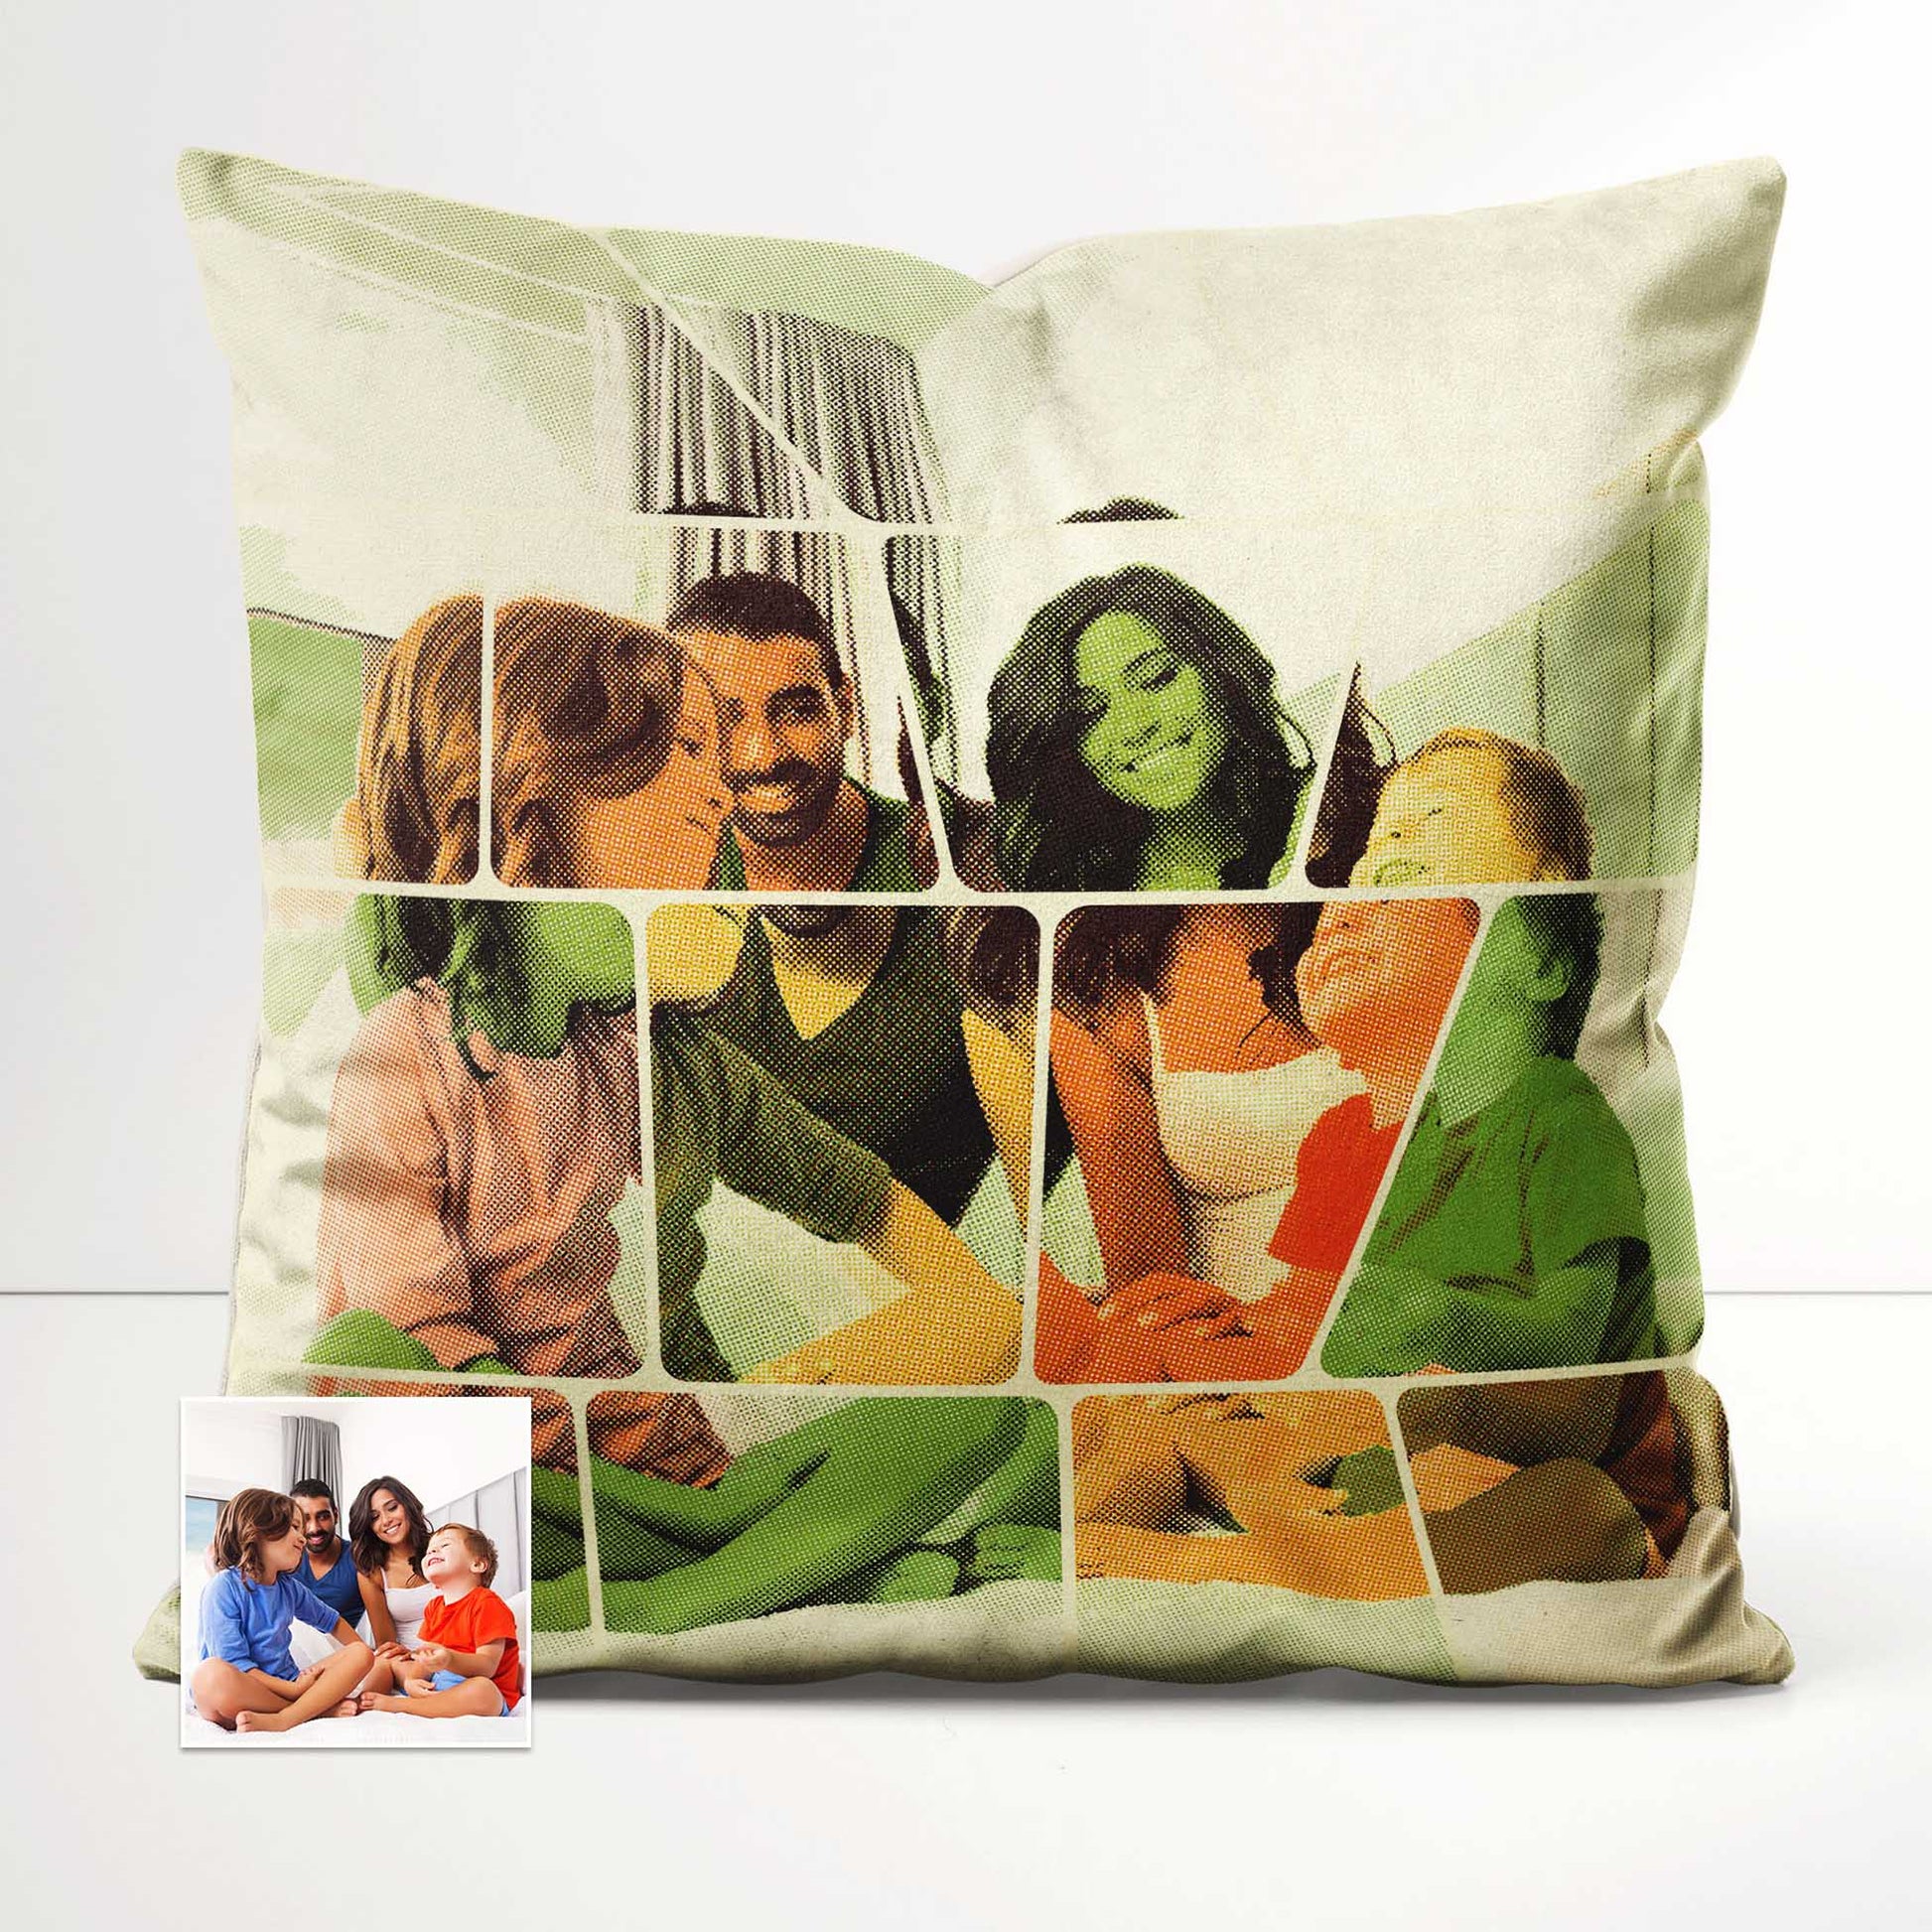 Transform your home decor with the Personalised Vintage Comics Cushion. Its cartoon design created from your photo infuses a fresh and cool energy, featuring vibrant orange and green colors, handmade soft velvet